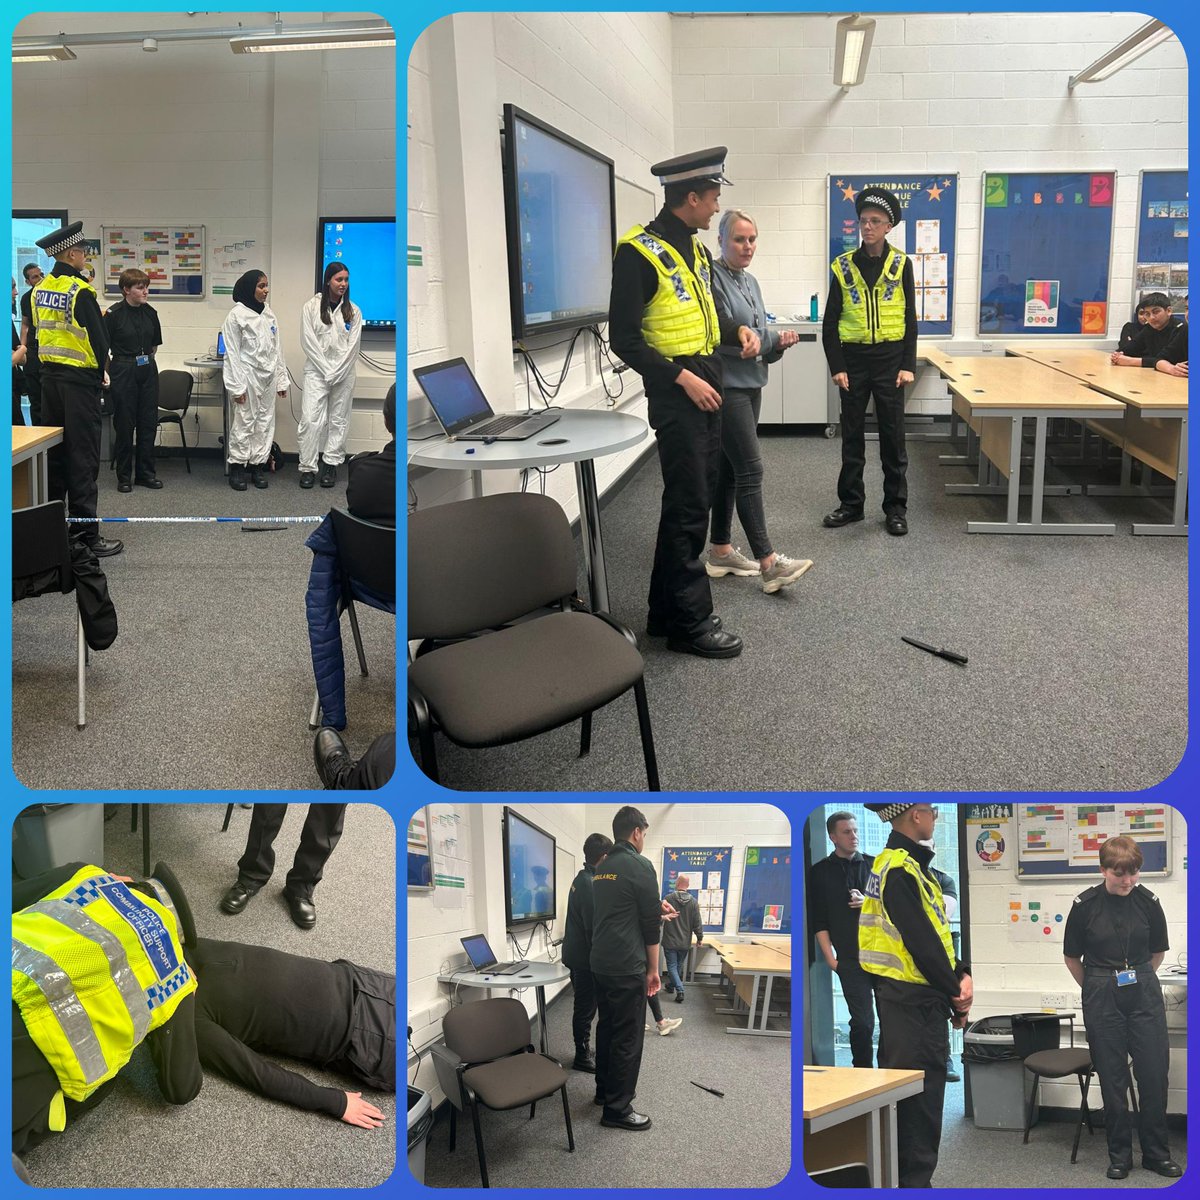 As part of #OpSceptre Cadets from the @WYP_BradfordW & @WYP_BradfordS Units where given a knife input from Bradford's Early Action Team #LivesNotKnives